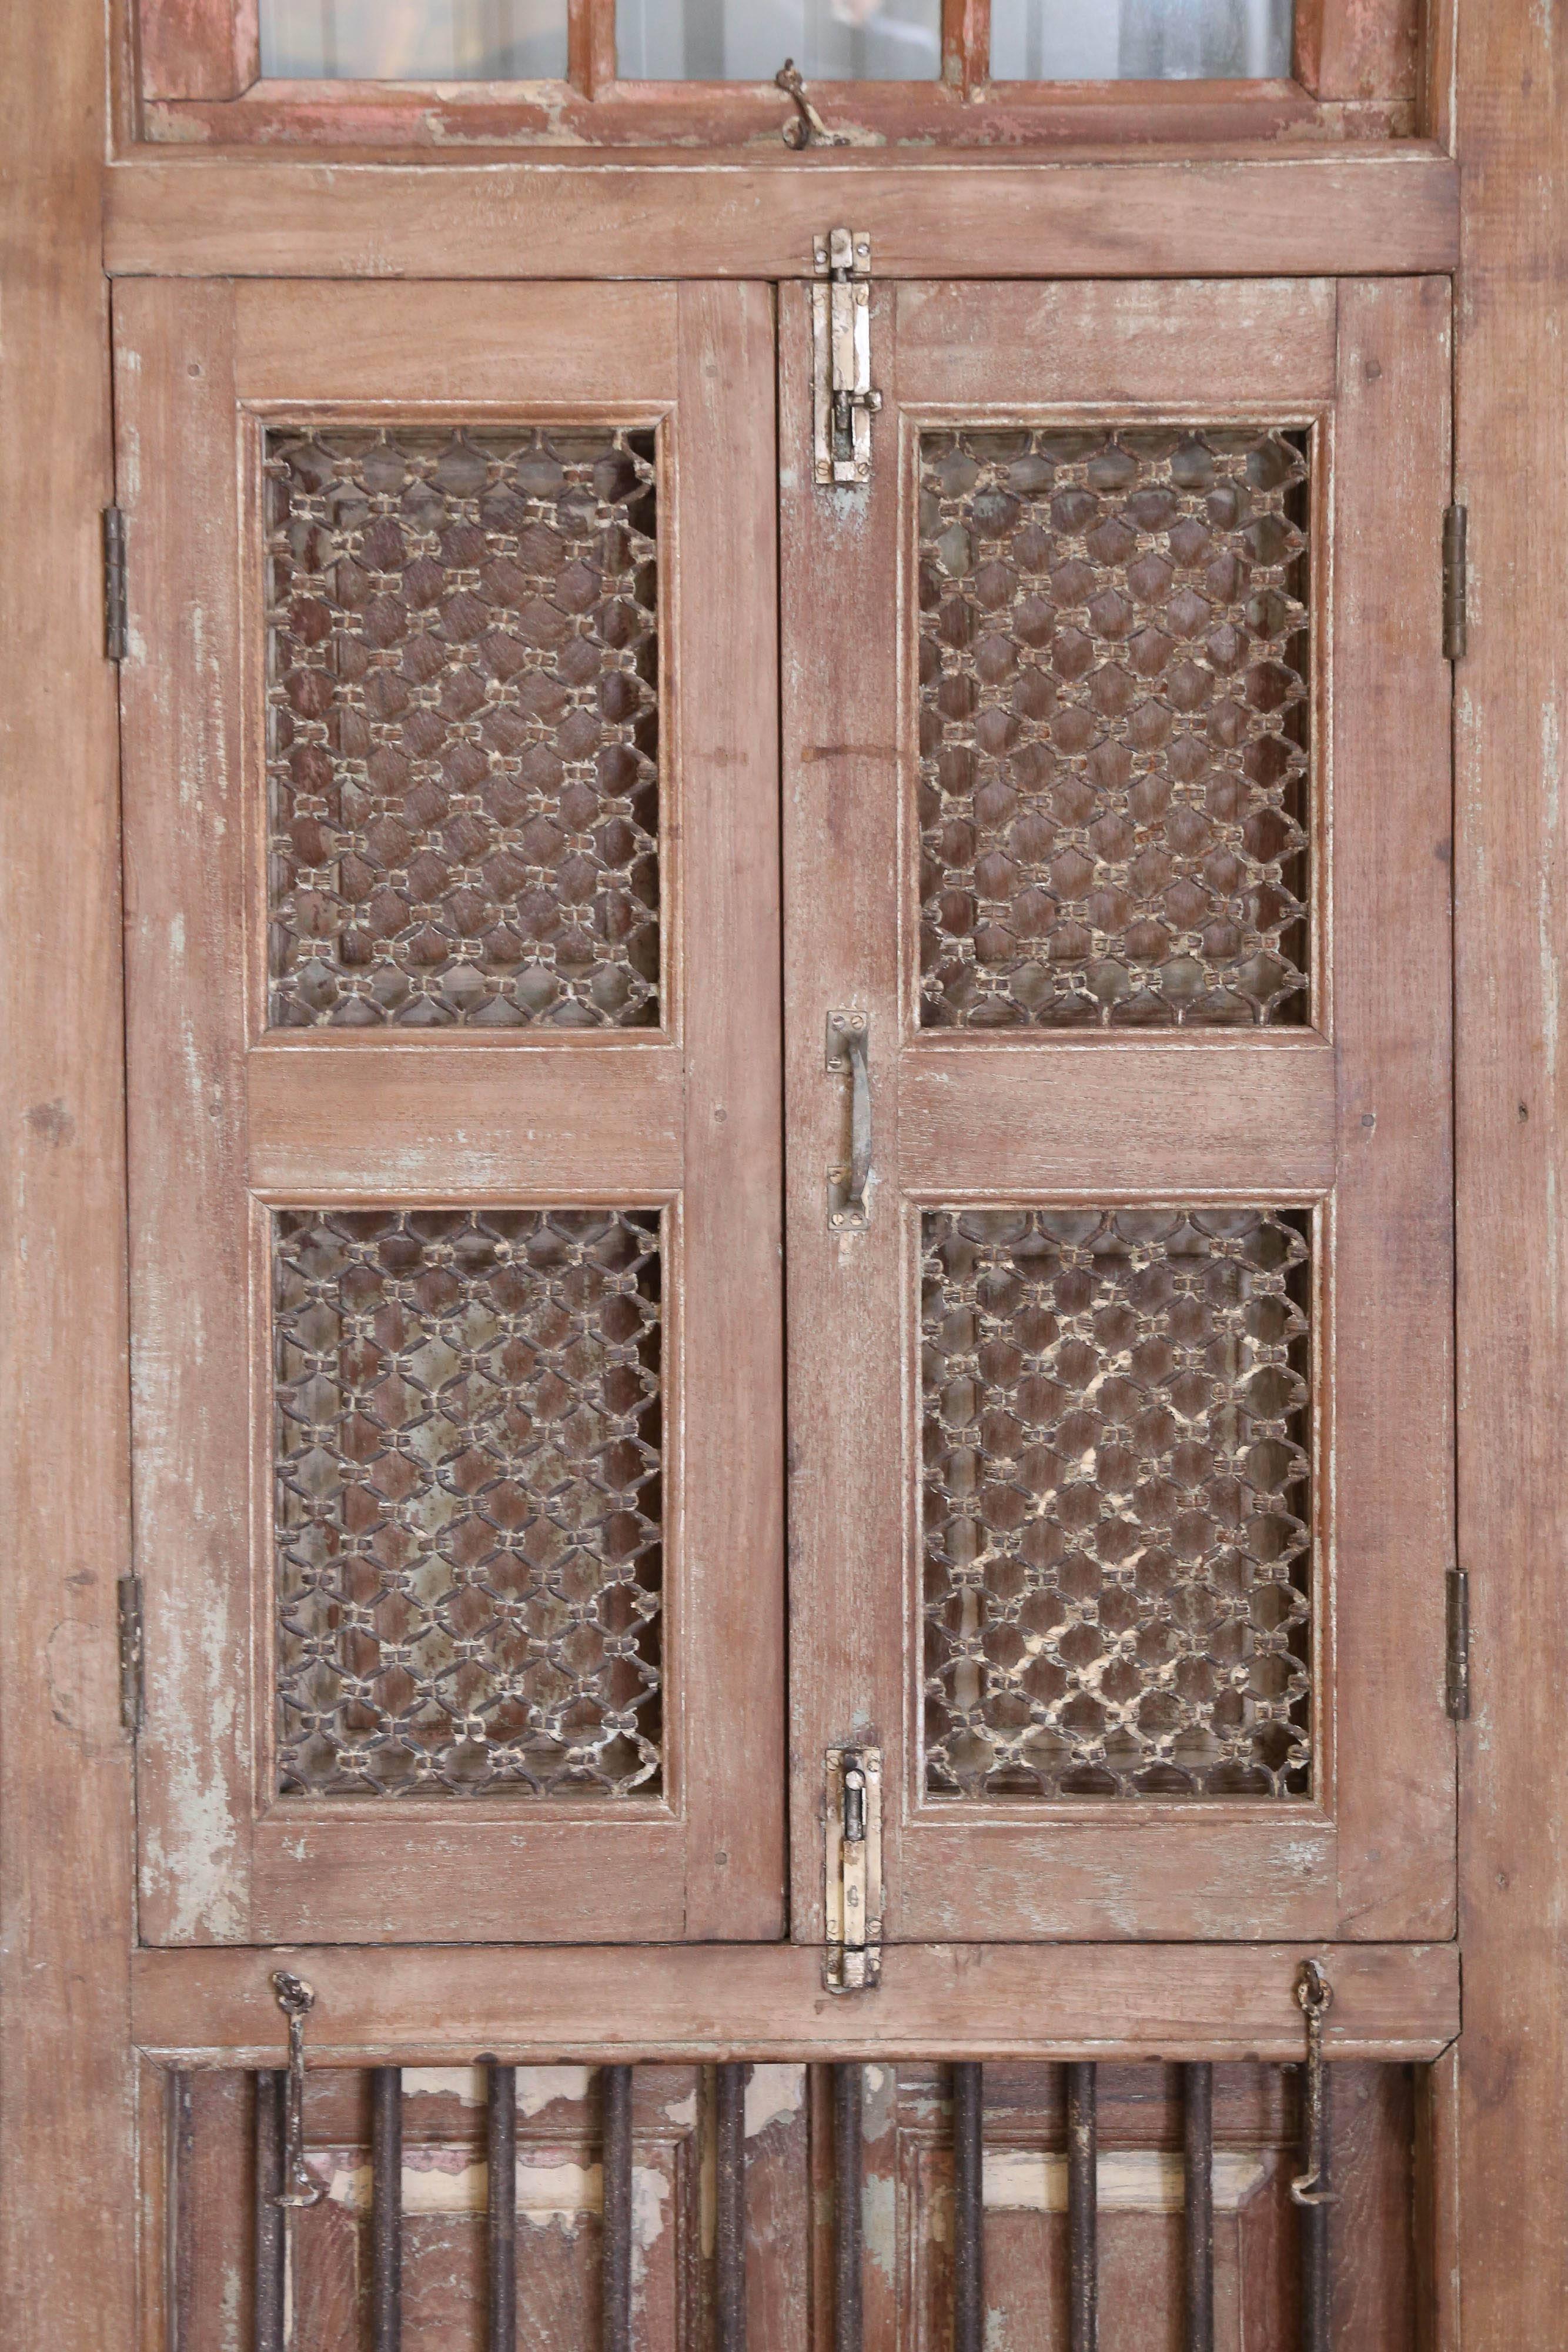 This elaborate solid teak wood window with intricately hand forged iron works comes from a Portuguese colonial church built in west coast of India in the early 19th century. It is made of solid teak wood with hand forged iron bars and iron screen.